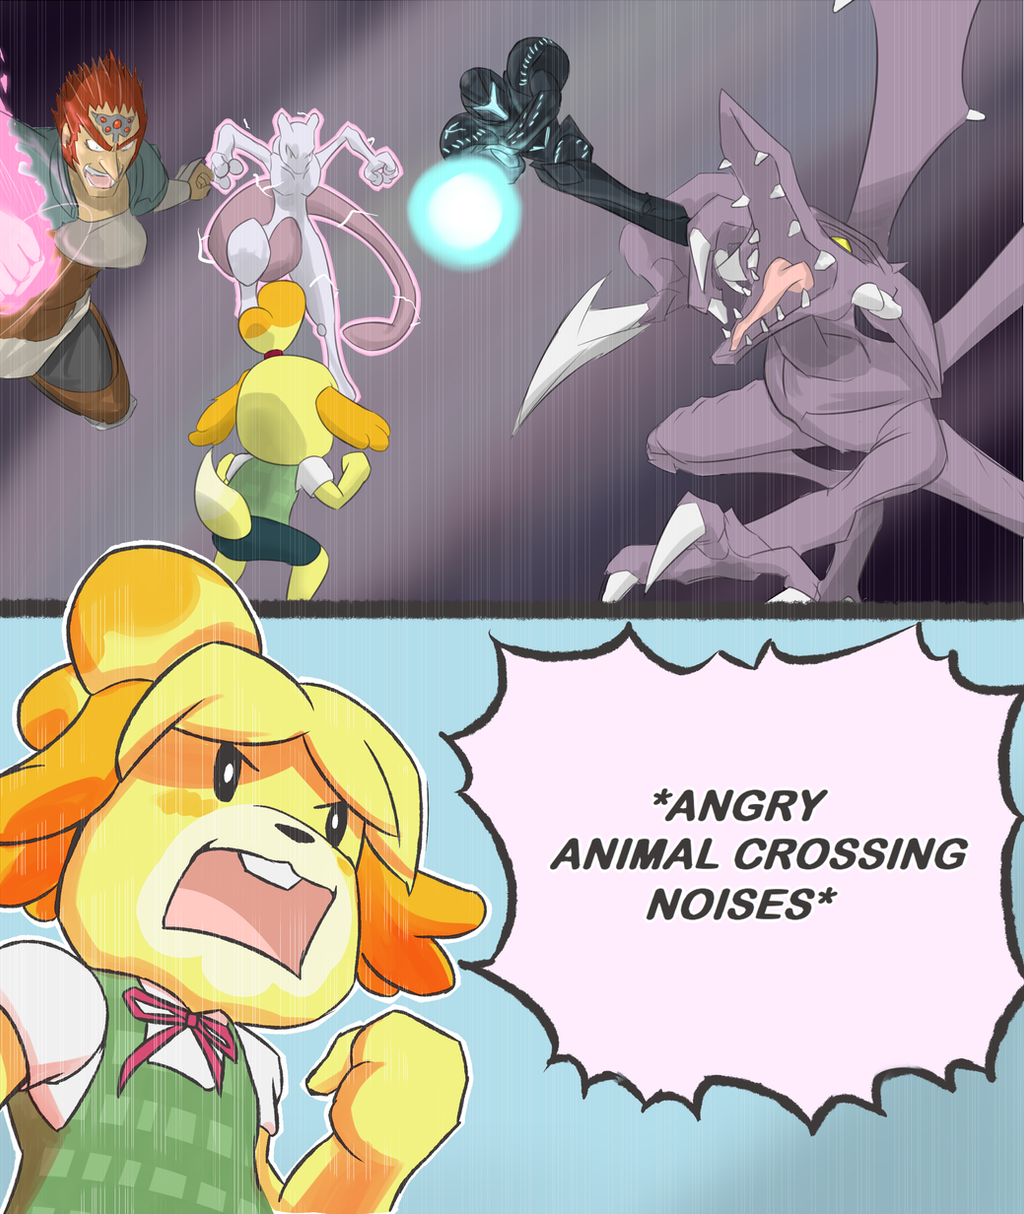 isabelle_will_bring_down_all_the_baddies_by_9kurinoa_chibi6-dcmvr0l.png